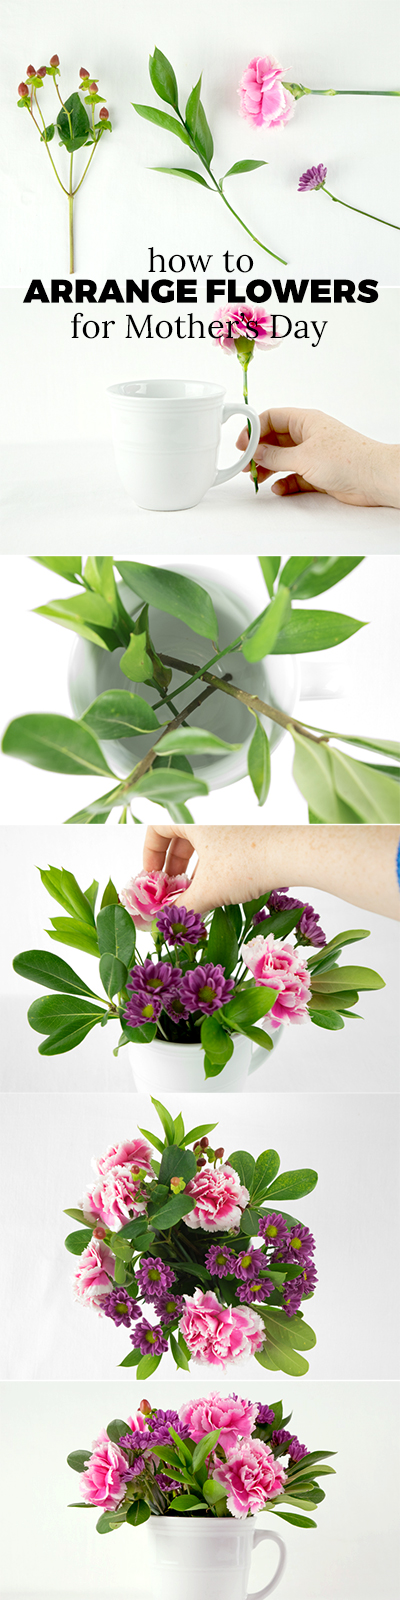 How to arrange flowers for Mother's Day